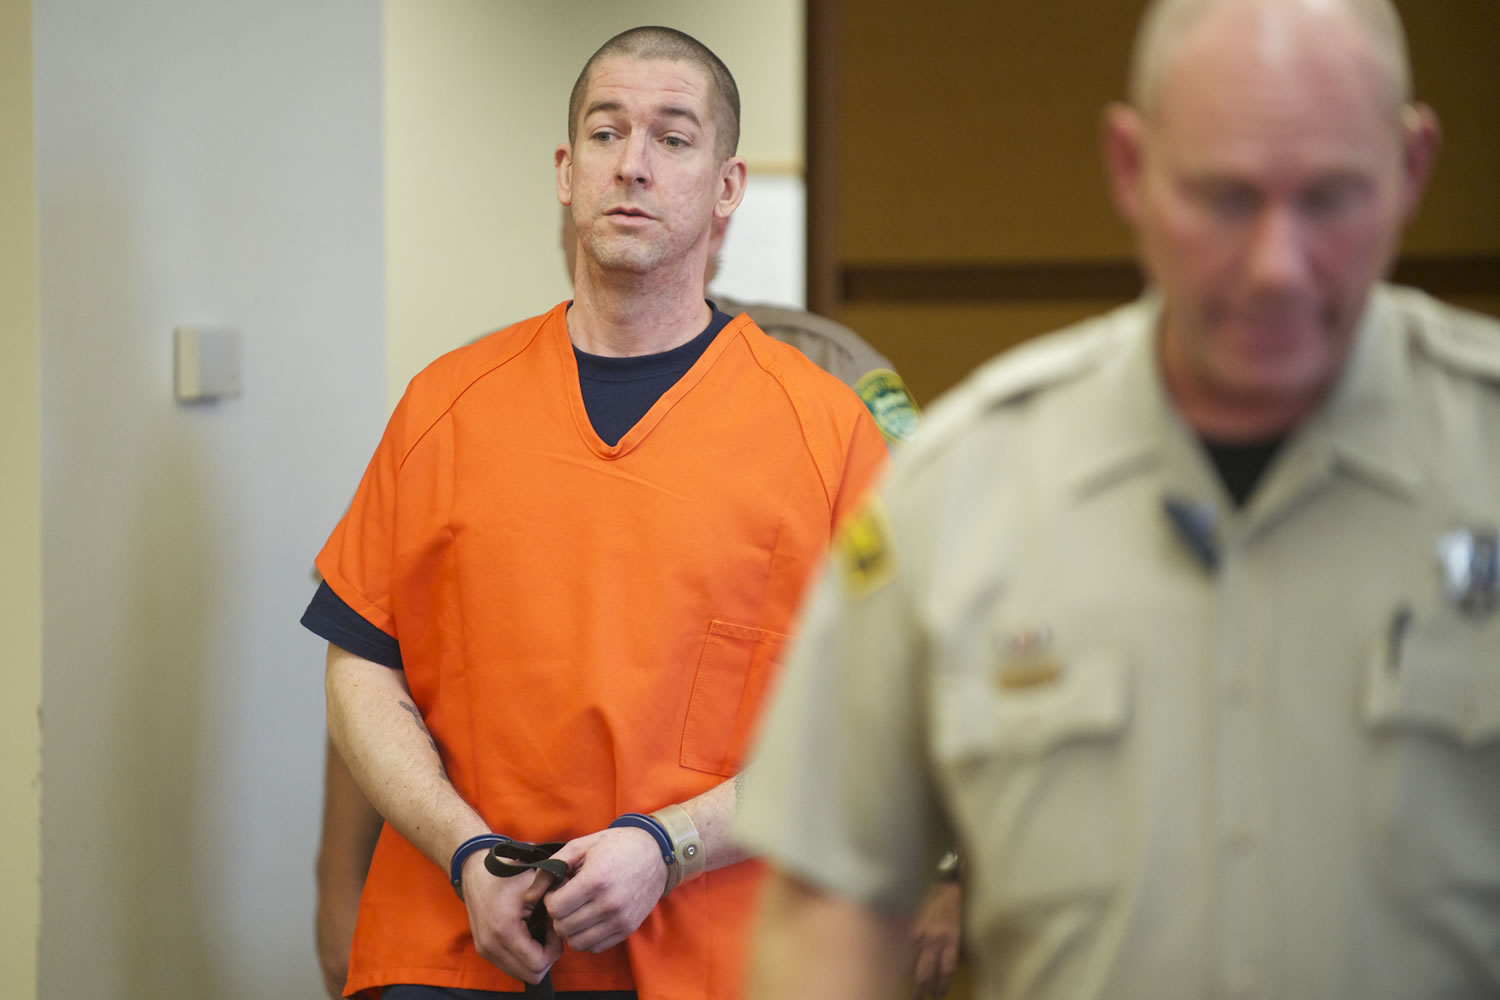 Mitchell O'Brien is escorted into Clark County Superior Court Judge John Nichols' courtroom to be sentenced for the June 2011 murder of Deneace L. McSpadden of Vancouver.